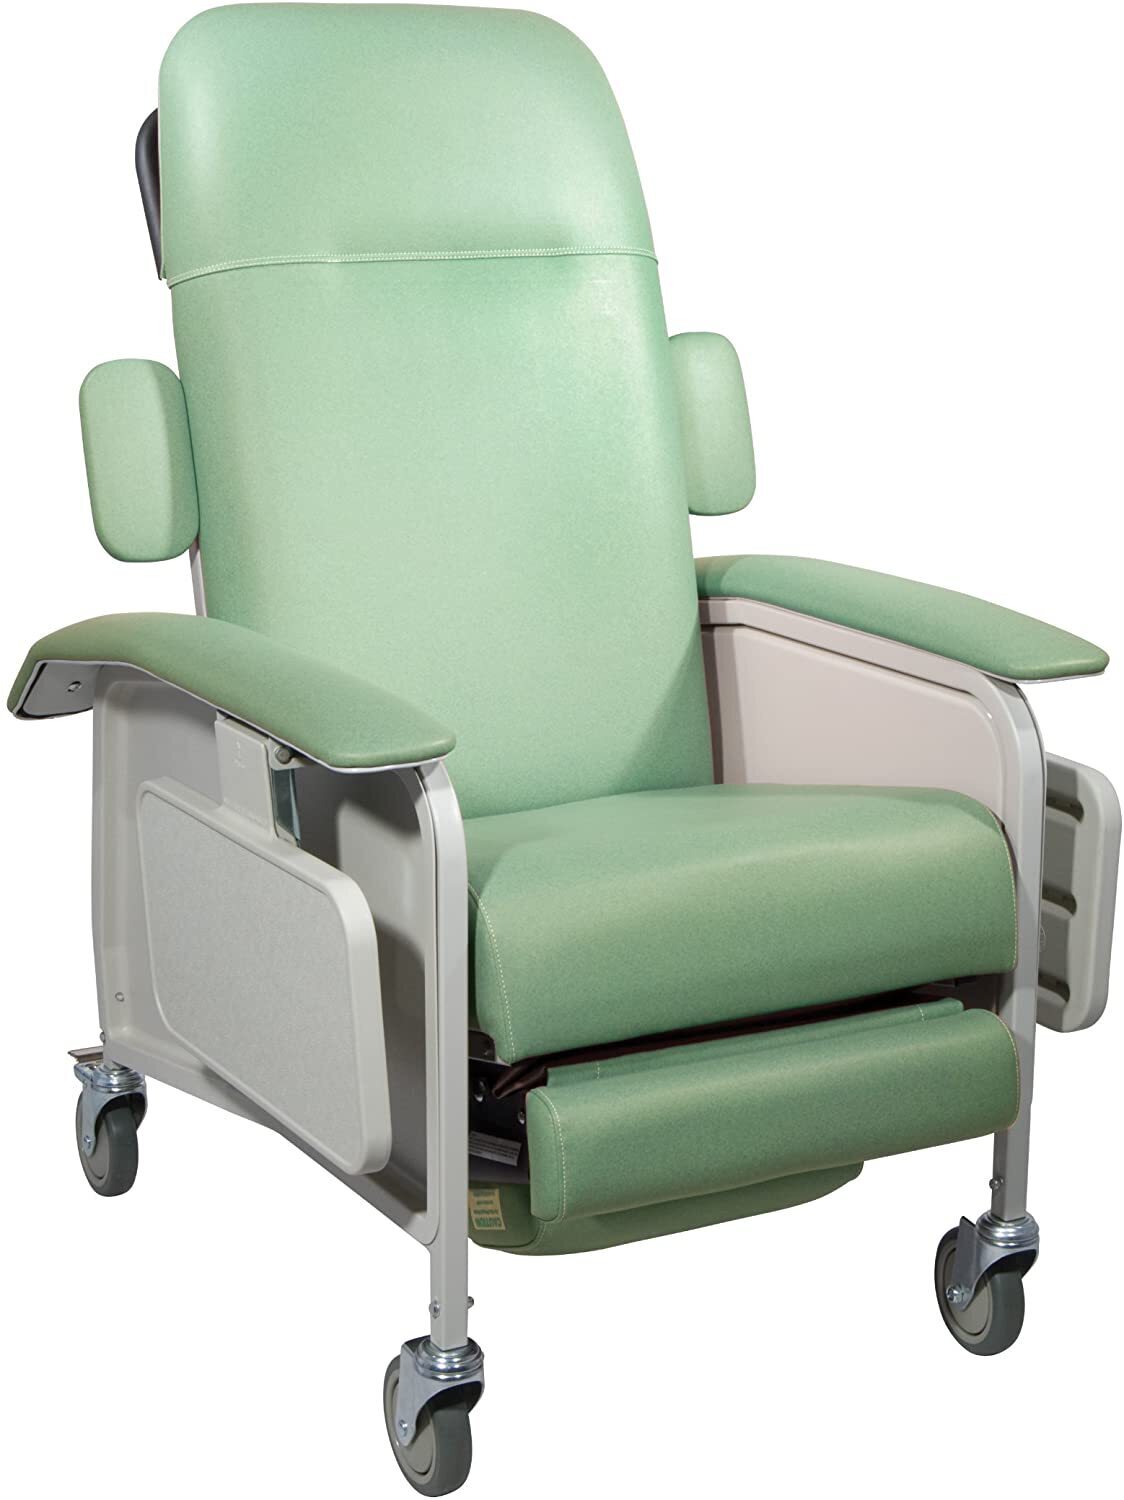 Geri Medical Chair For Home